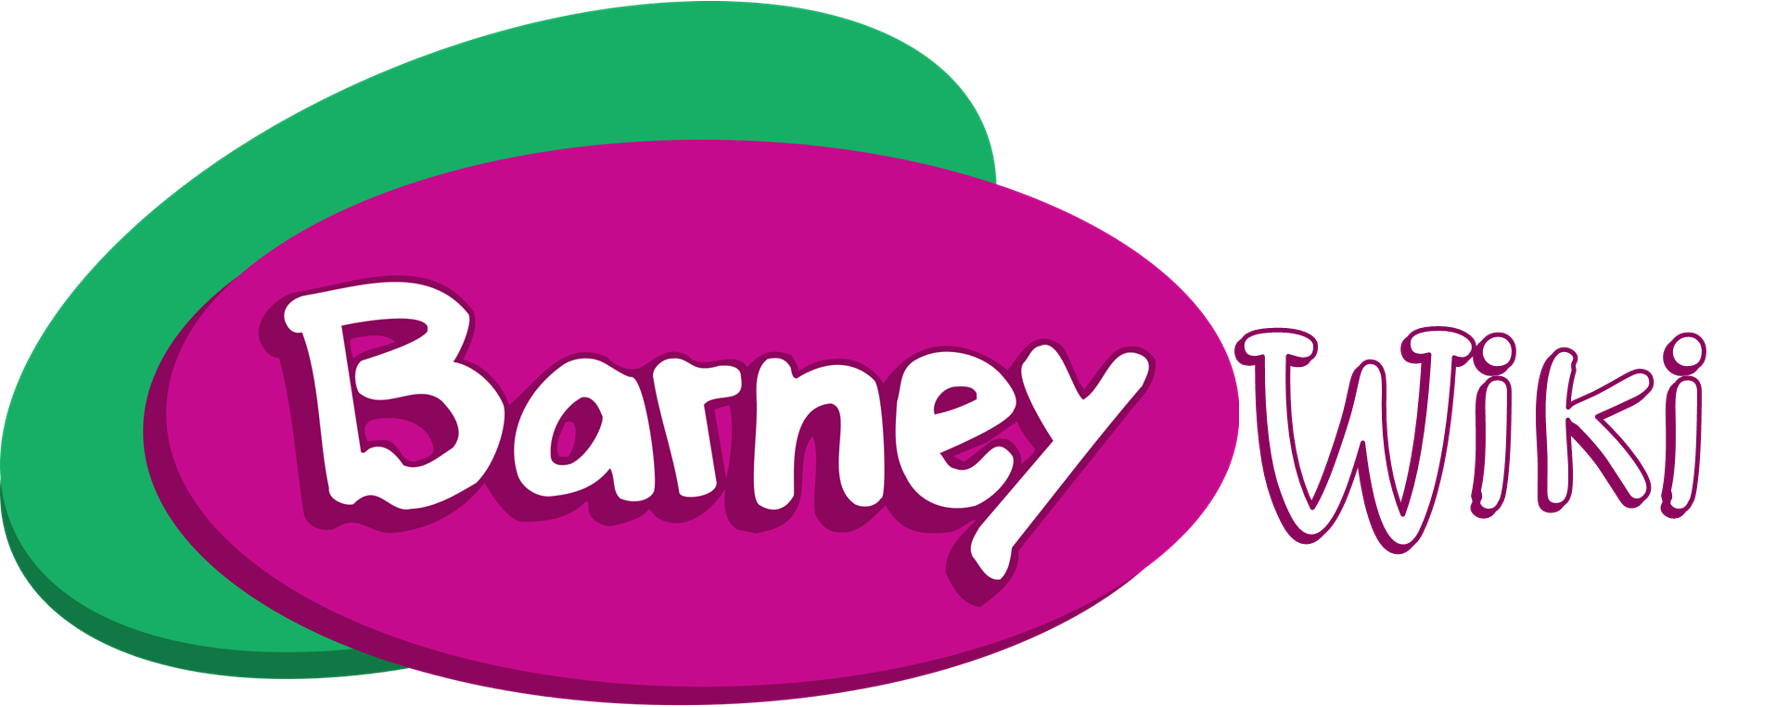 Play For Exercise Barney Wiki Fandom Powered By Wikia